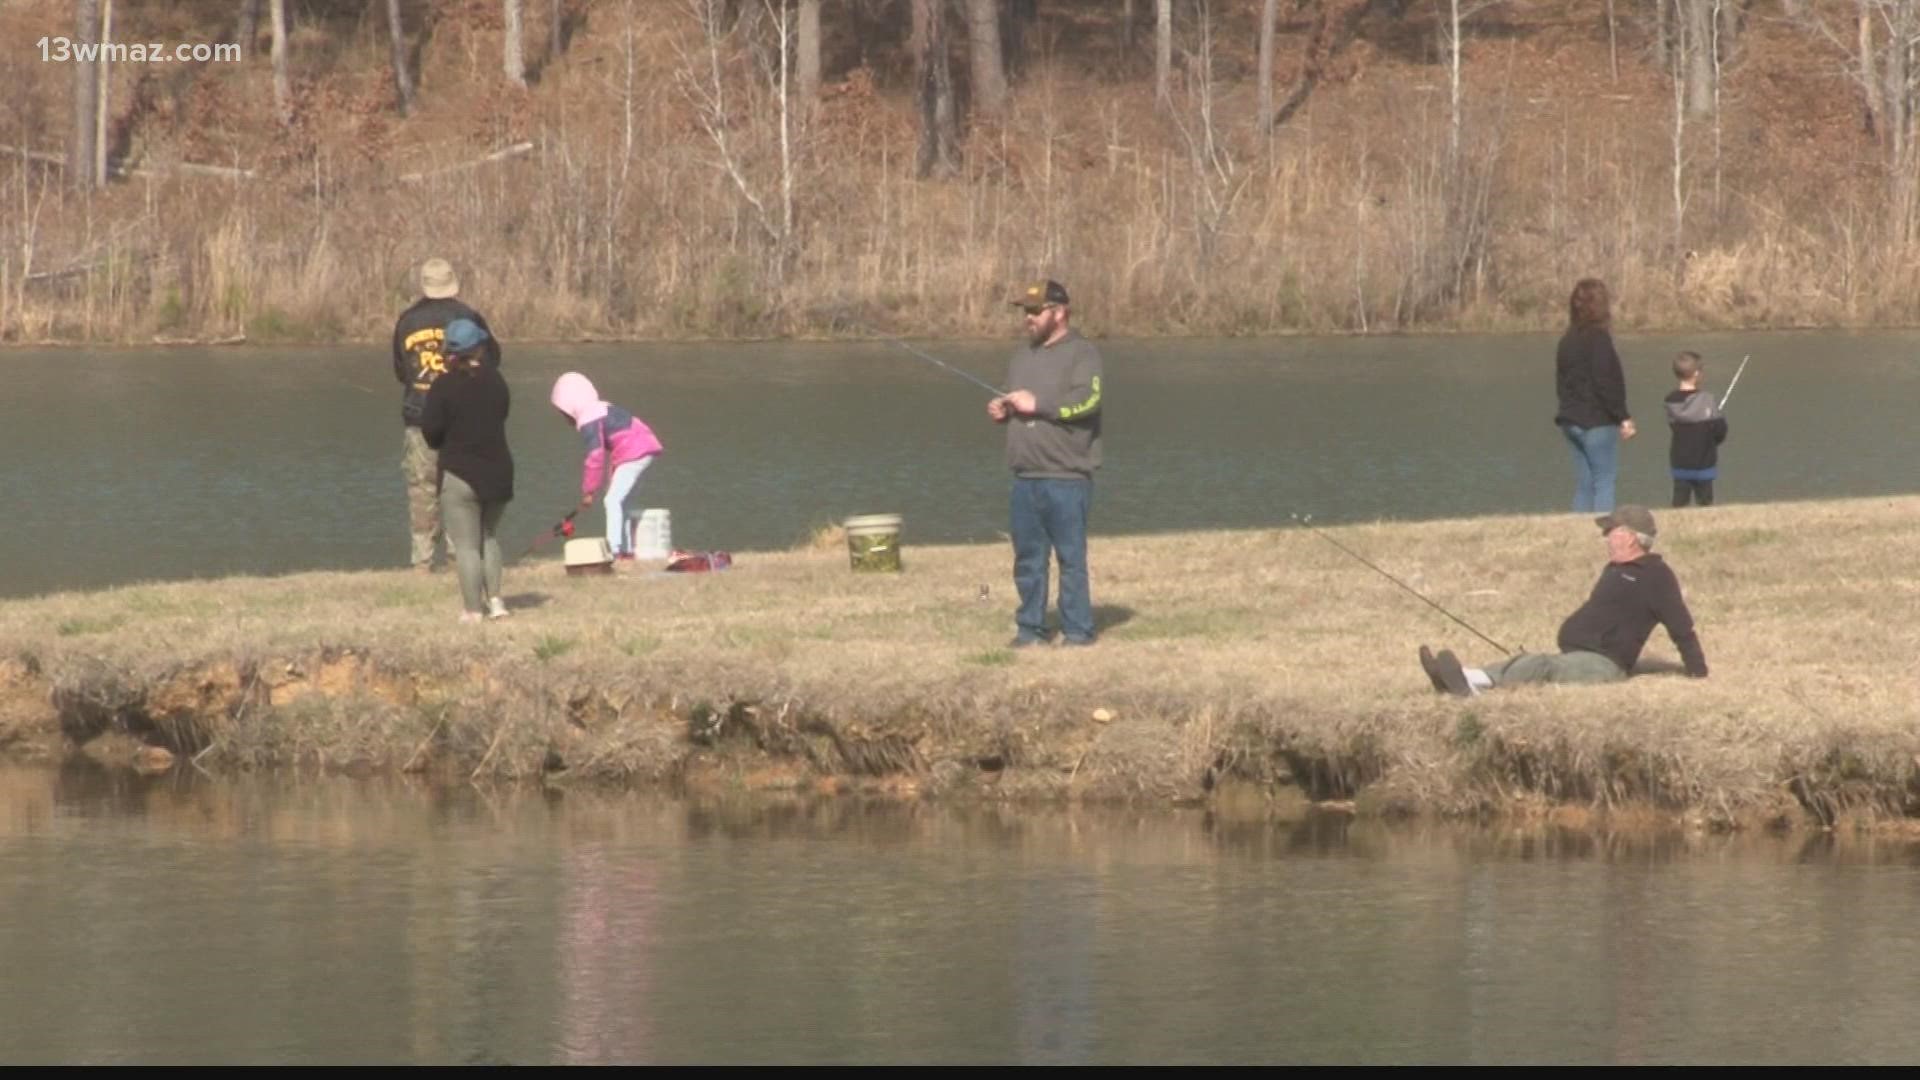 The pond was stocked with trout for kids ages 3-17.